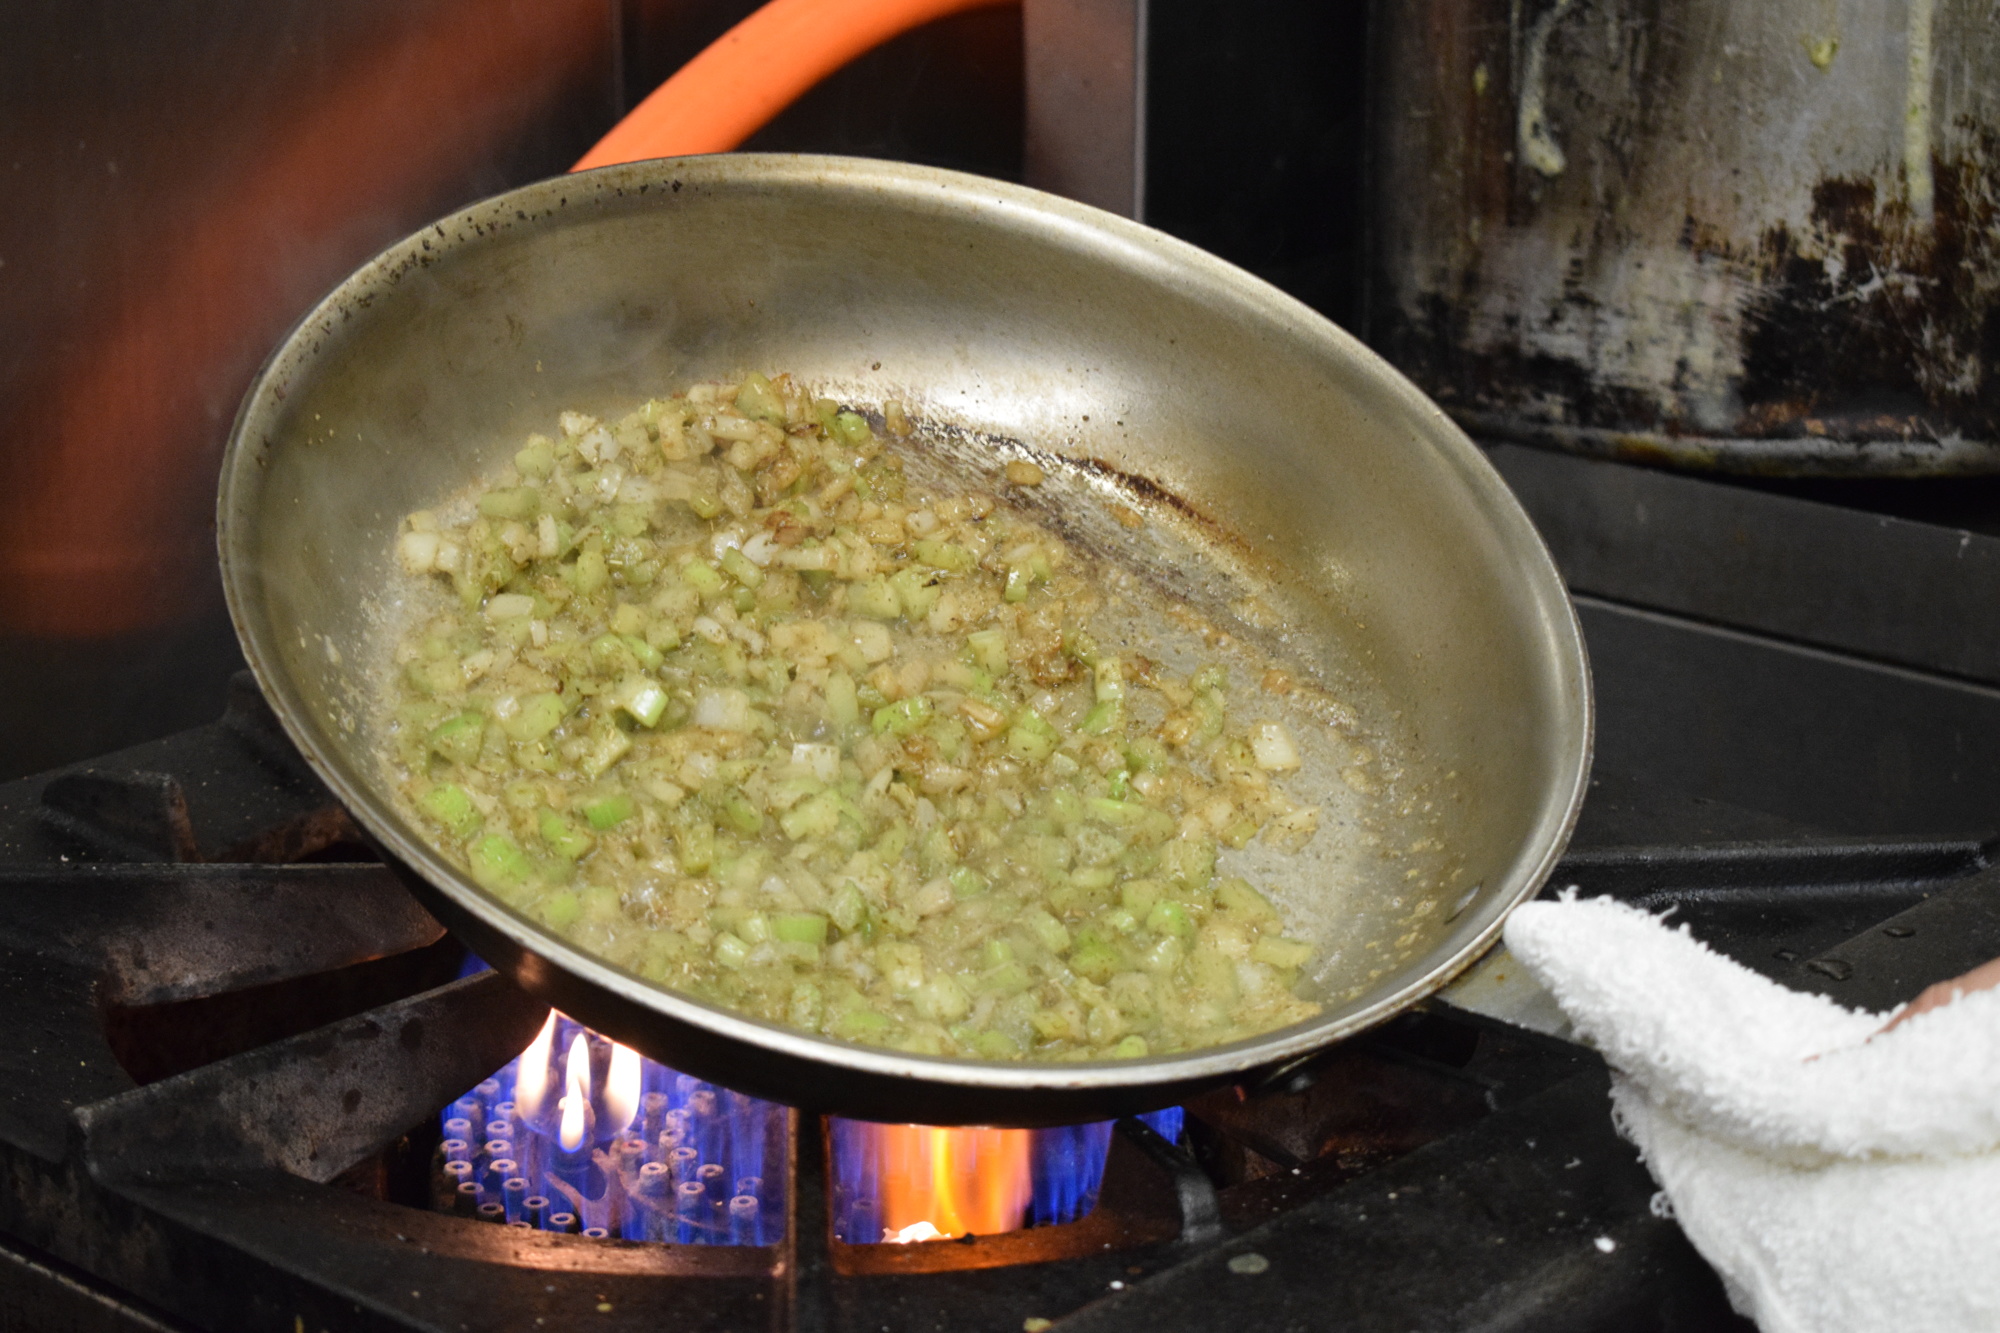 Greg Campbell, the executive chef and director of operations at the Grove restaurant, sautés onions and celery in butter.